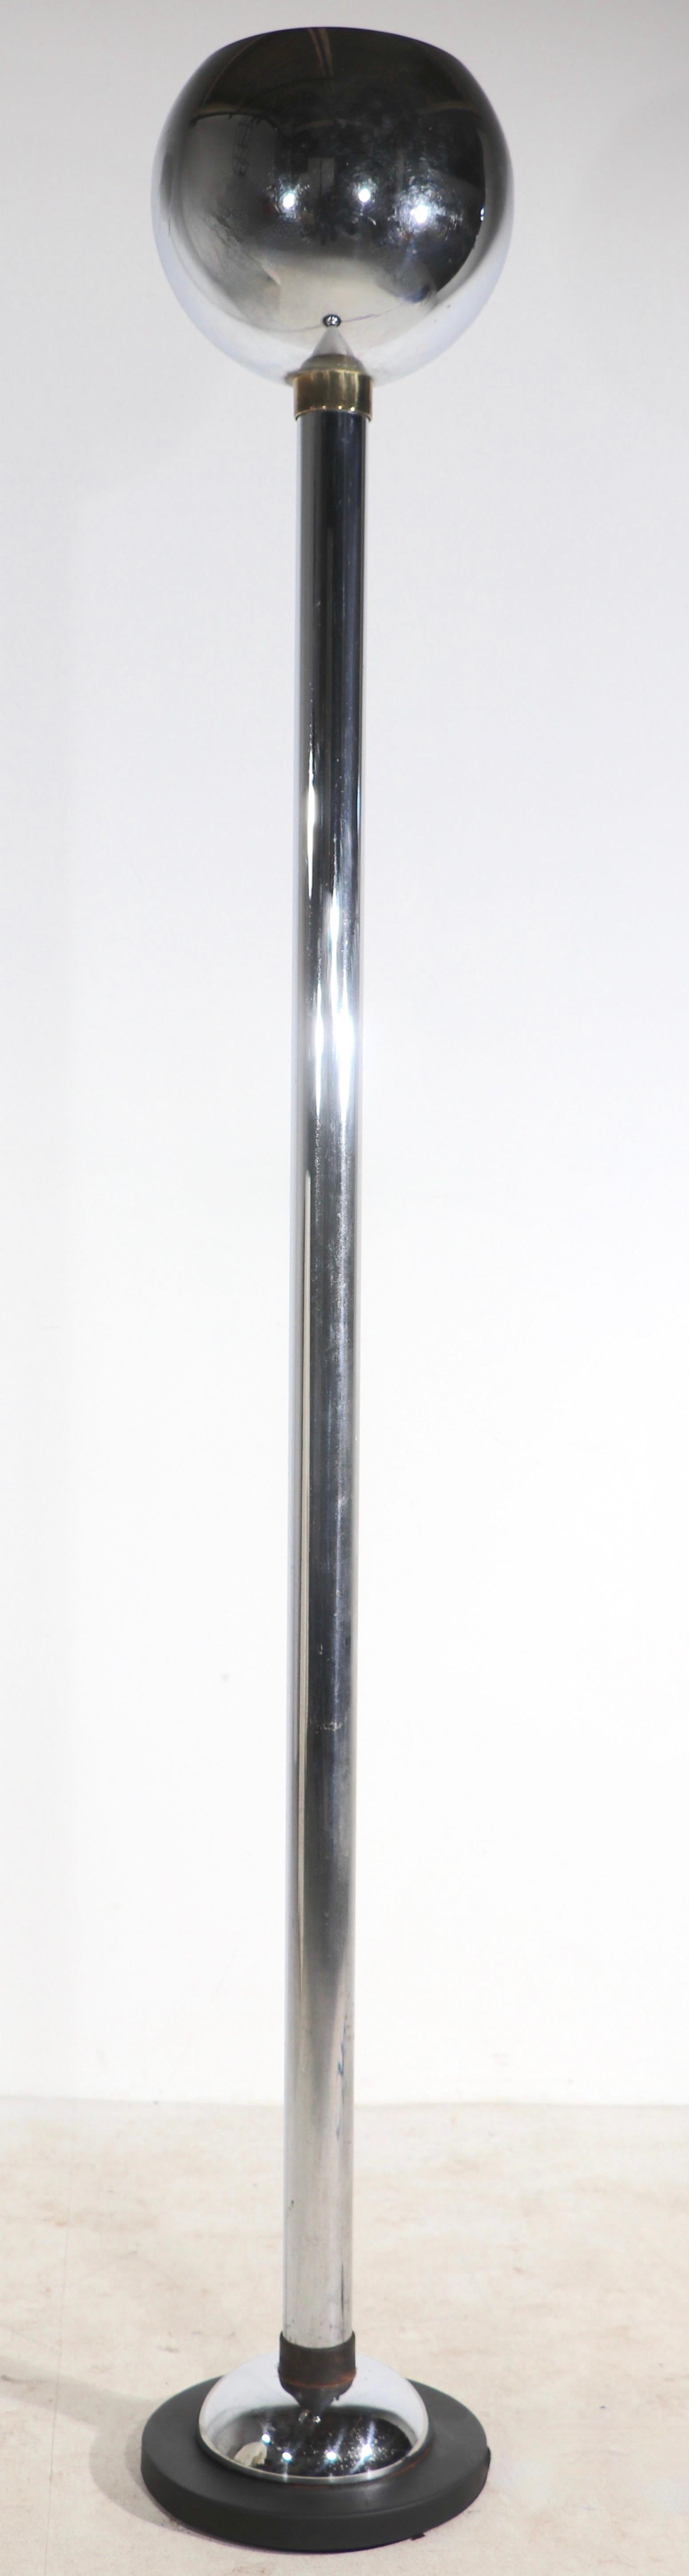 Art Deco Machine Age Chrome and Black Torchiere Uplight Floor Lamp, Ca. 1930's For Sale 6